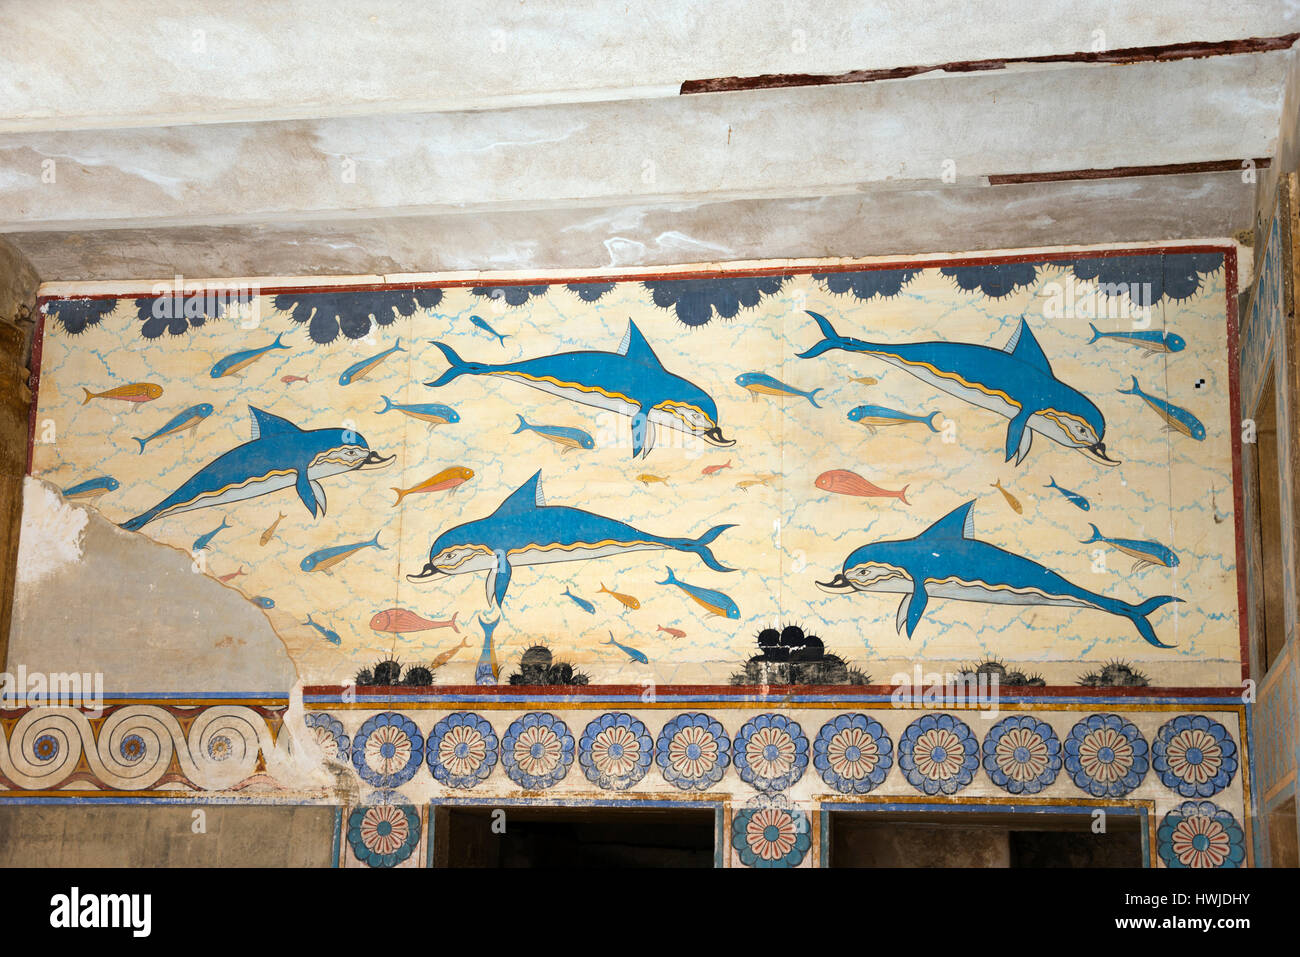 Frescoes, Dolphins wall painting, Palace of the Minoans, Knossos, Crete, Greece Stock Photo